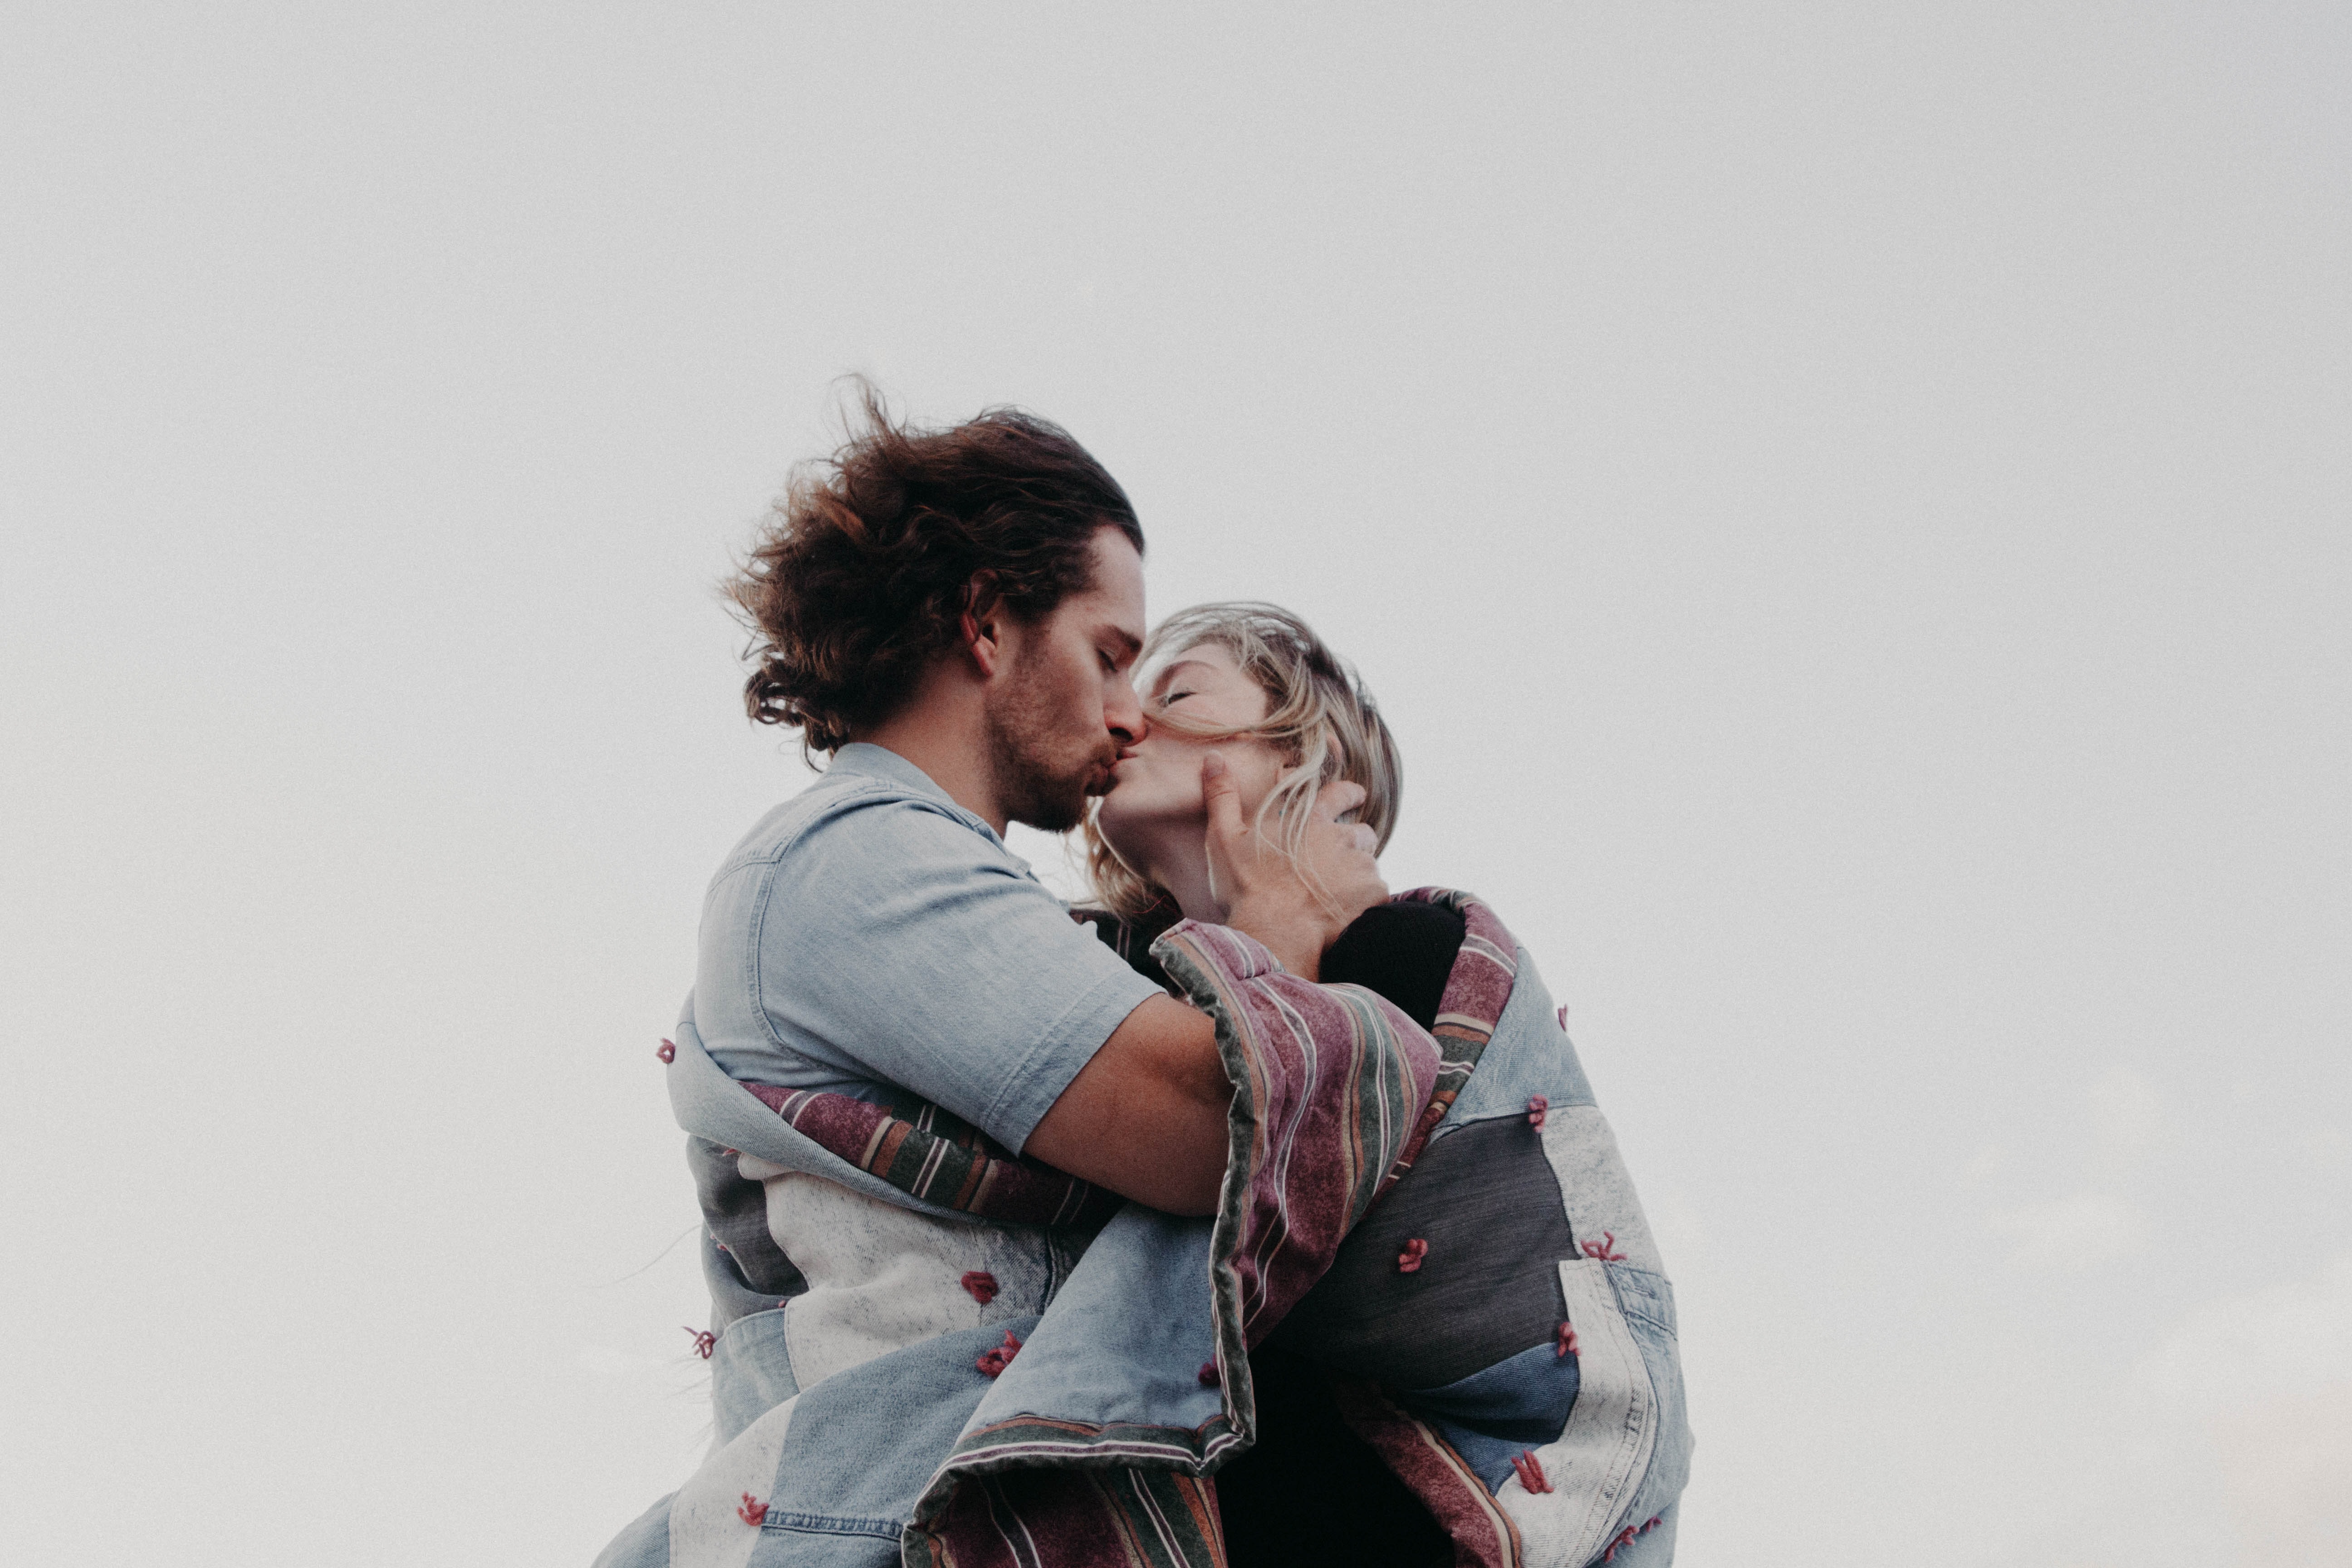 When to kiss an aries man in a relationship?